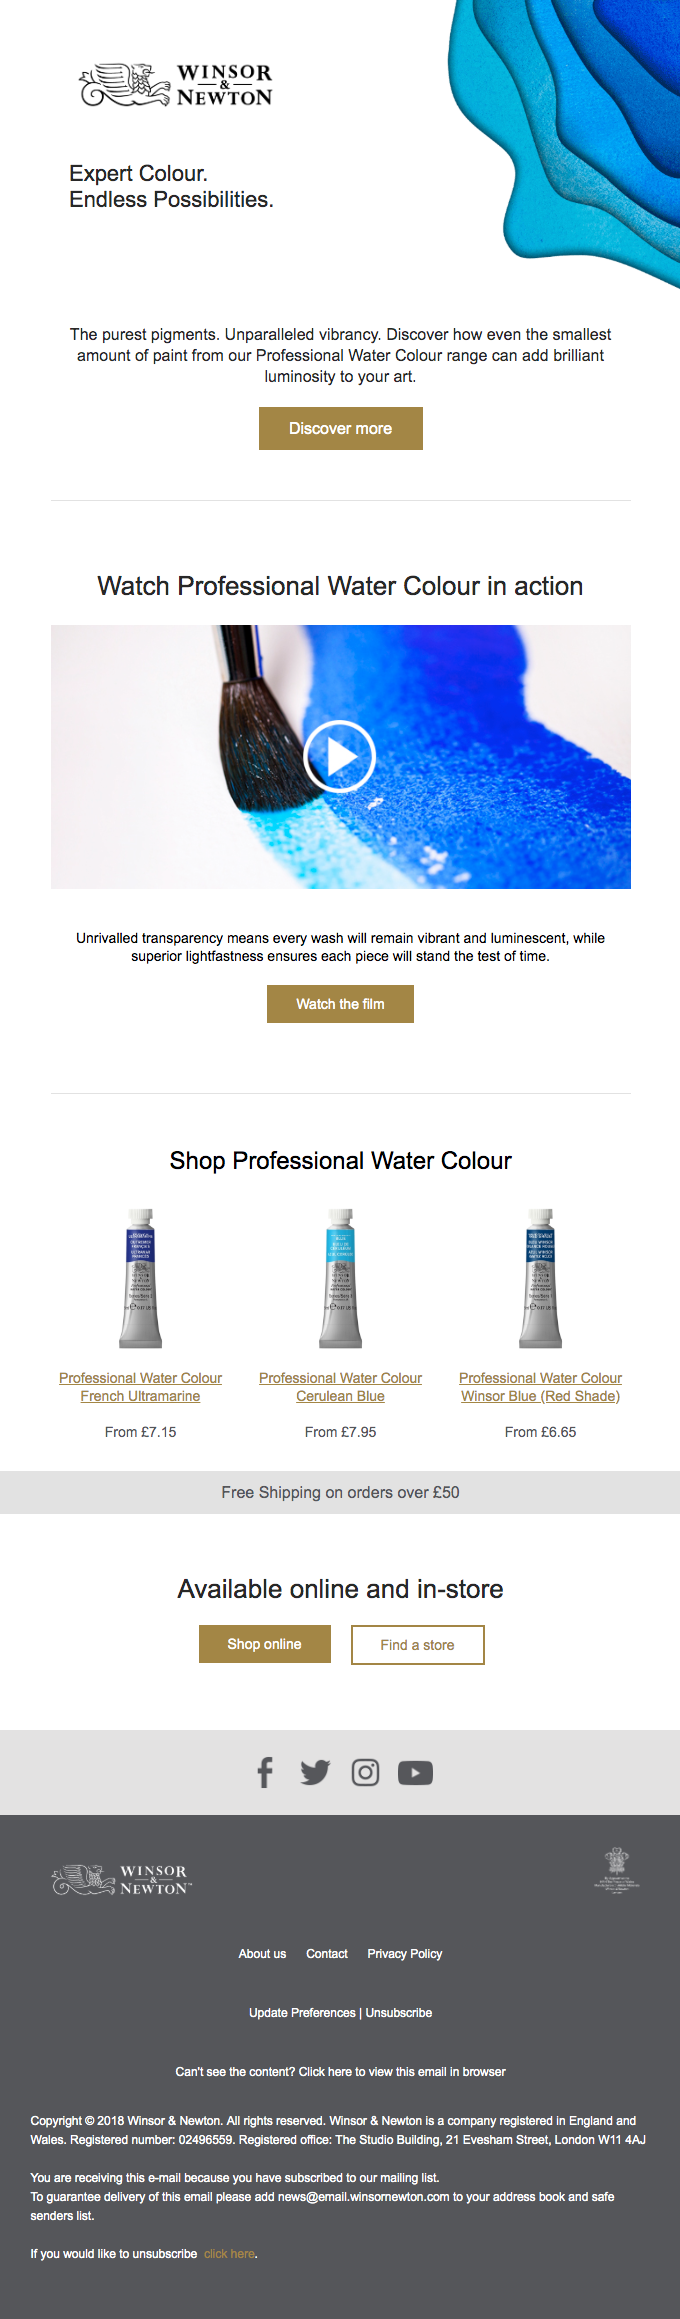 Professional Water Color: Expert Color. Endless Possibilities